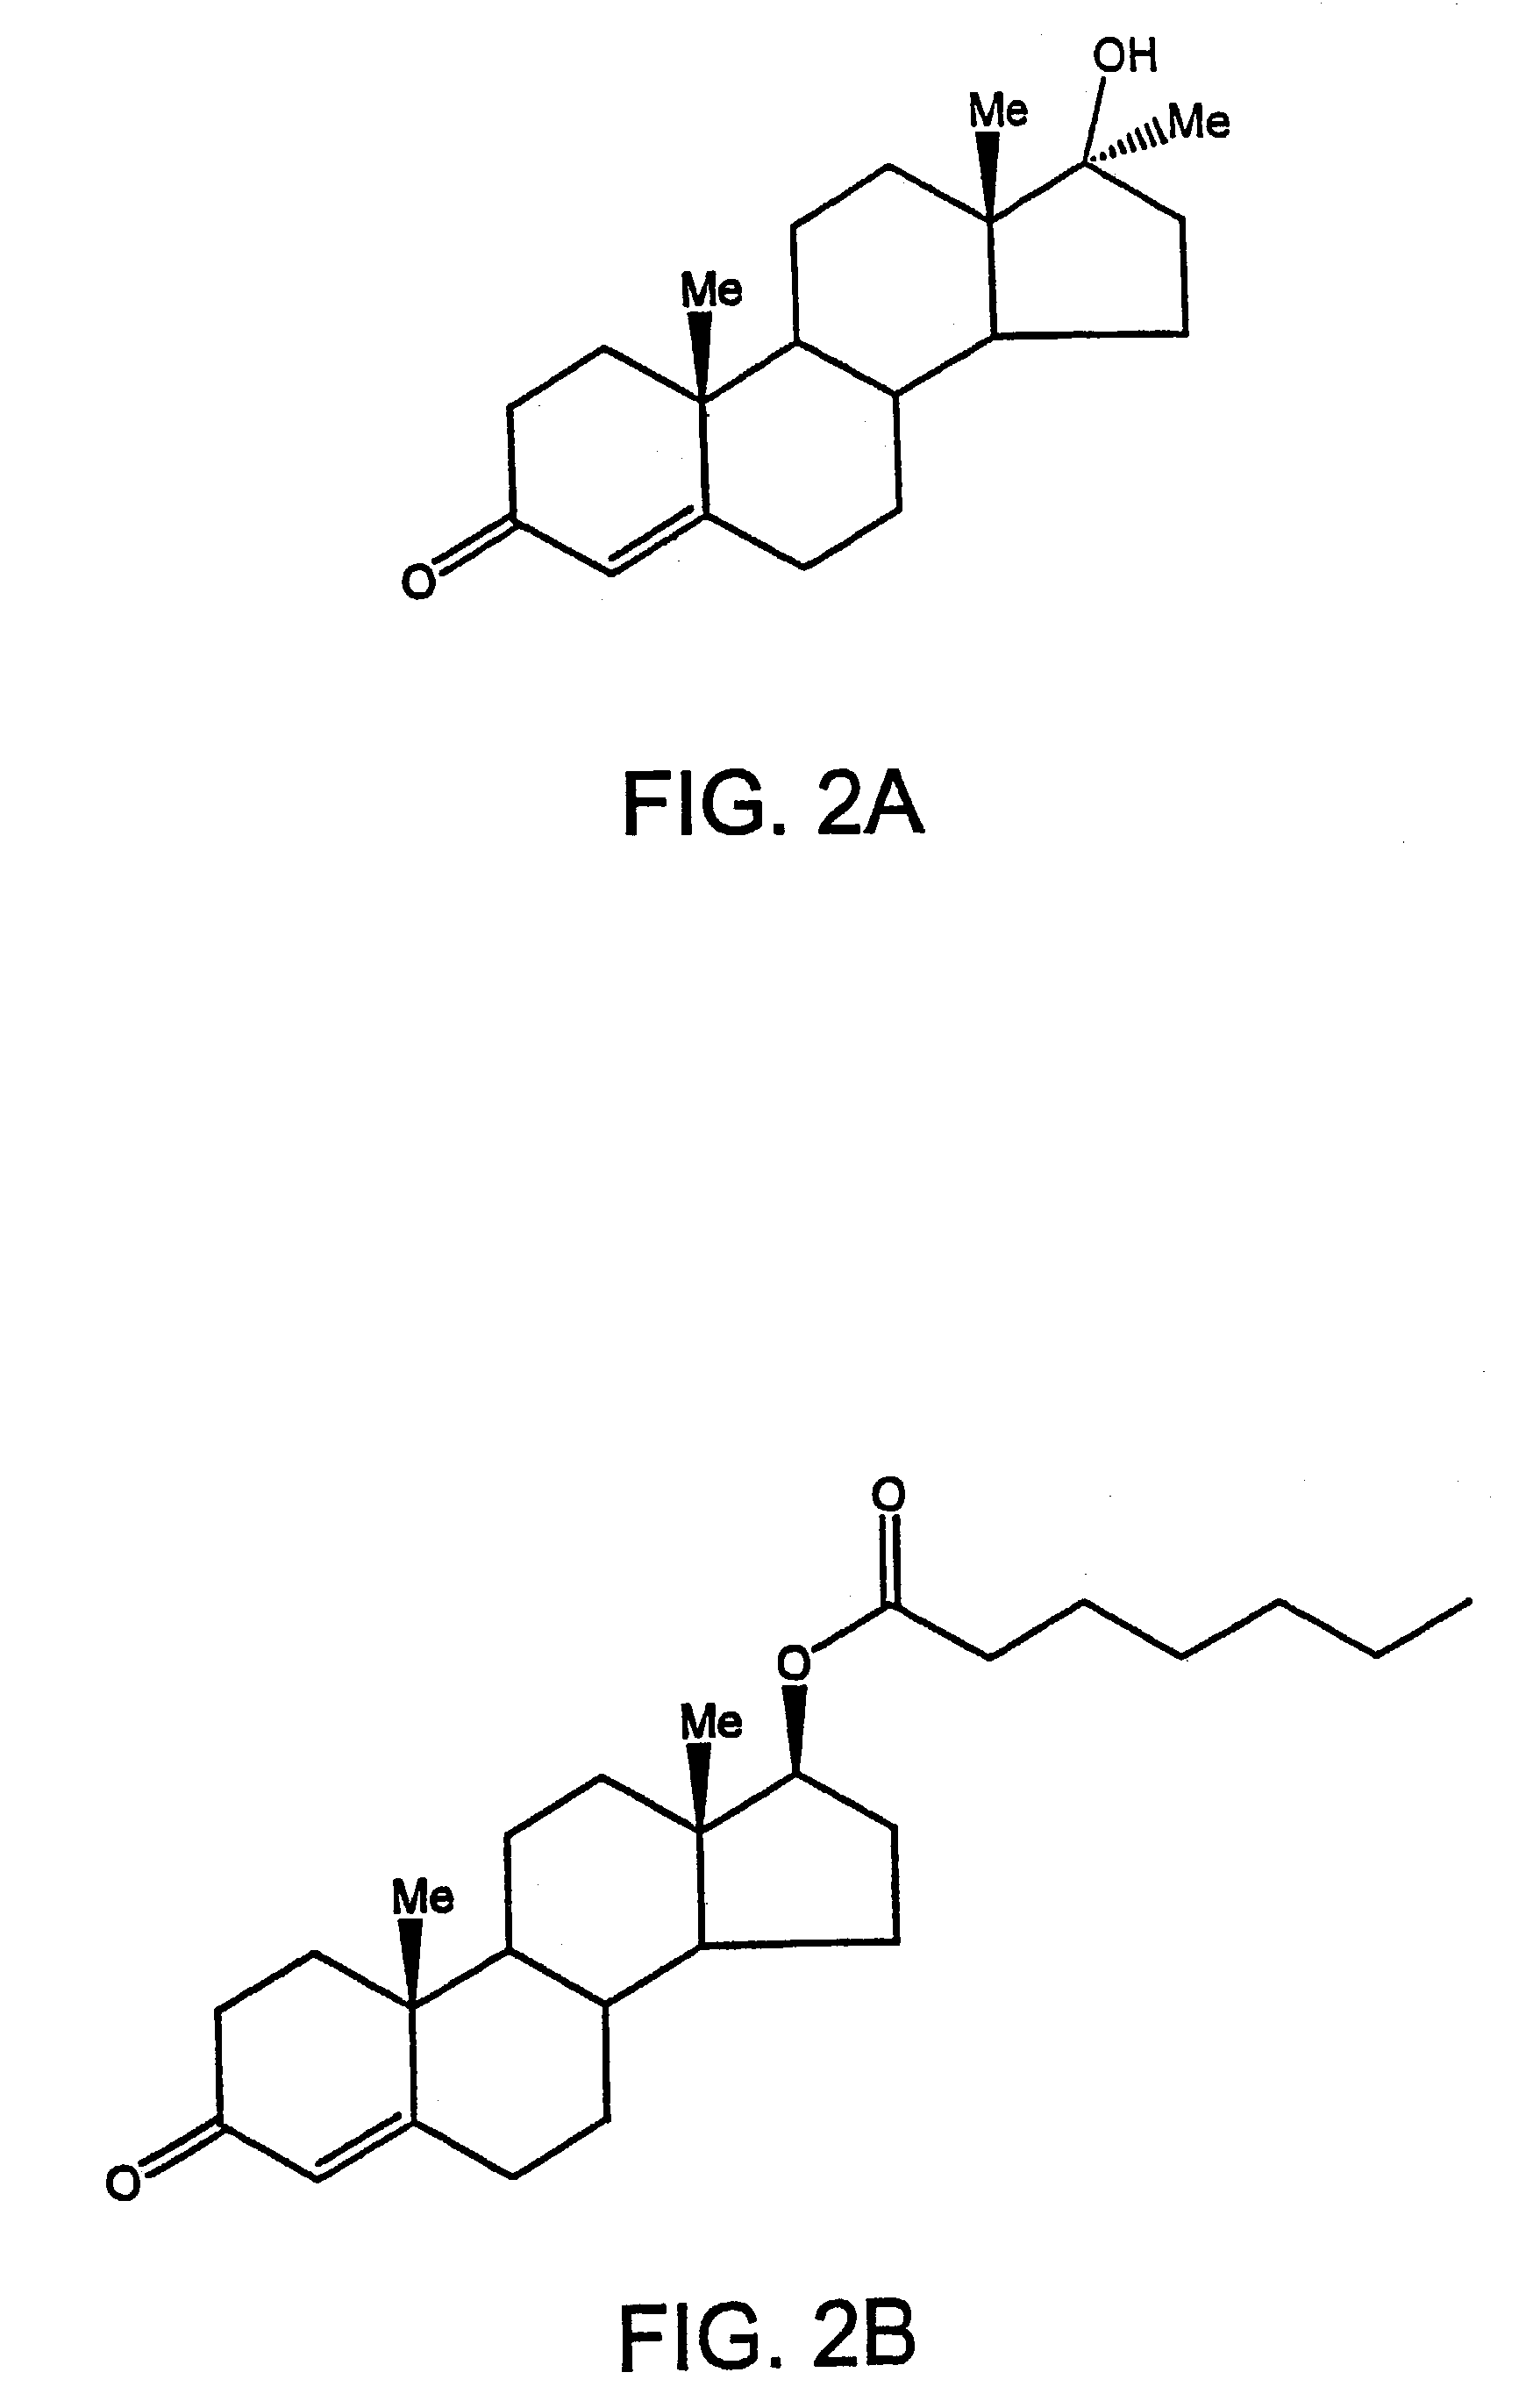 Methods of making, using and pharmaceutical formulations comprising 7alpha, 11beta-dimethyl-17beta-hydroxyestra-4, 14-dien-3-one and 17 esters thereof